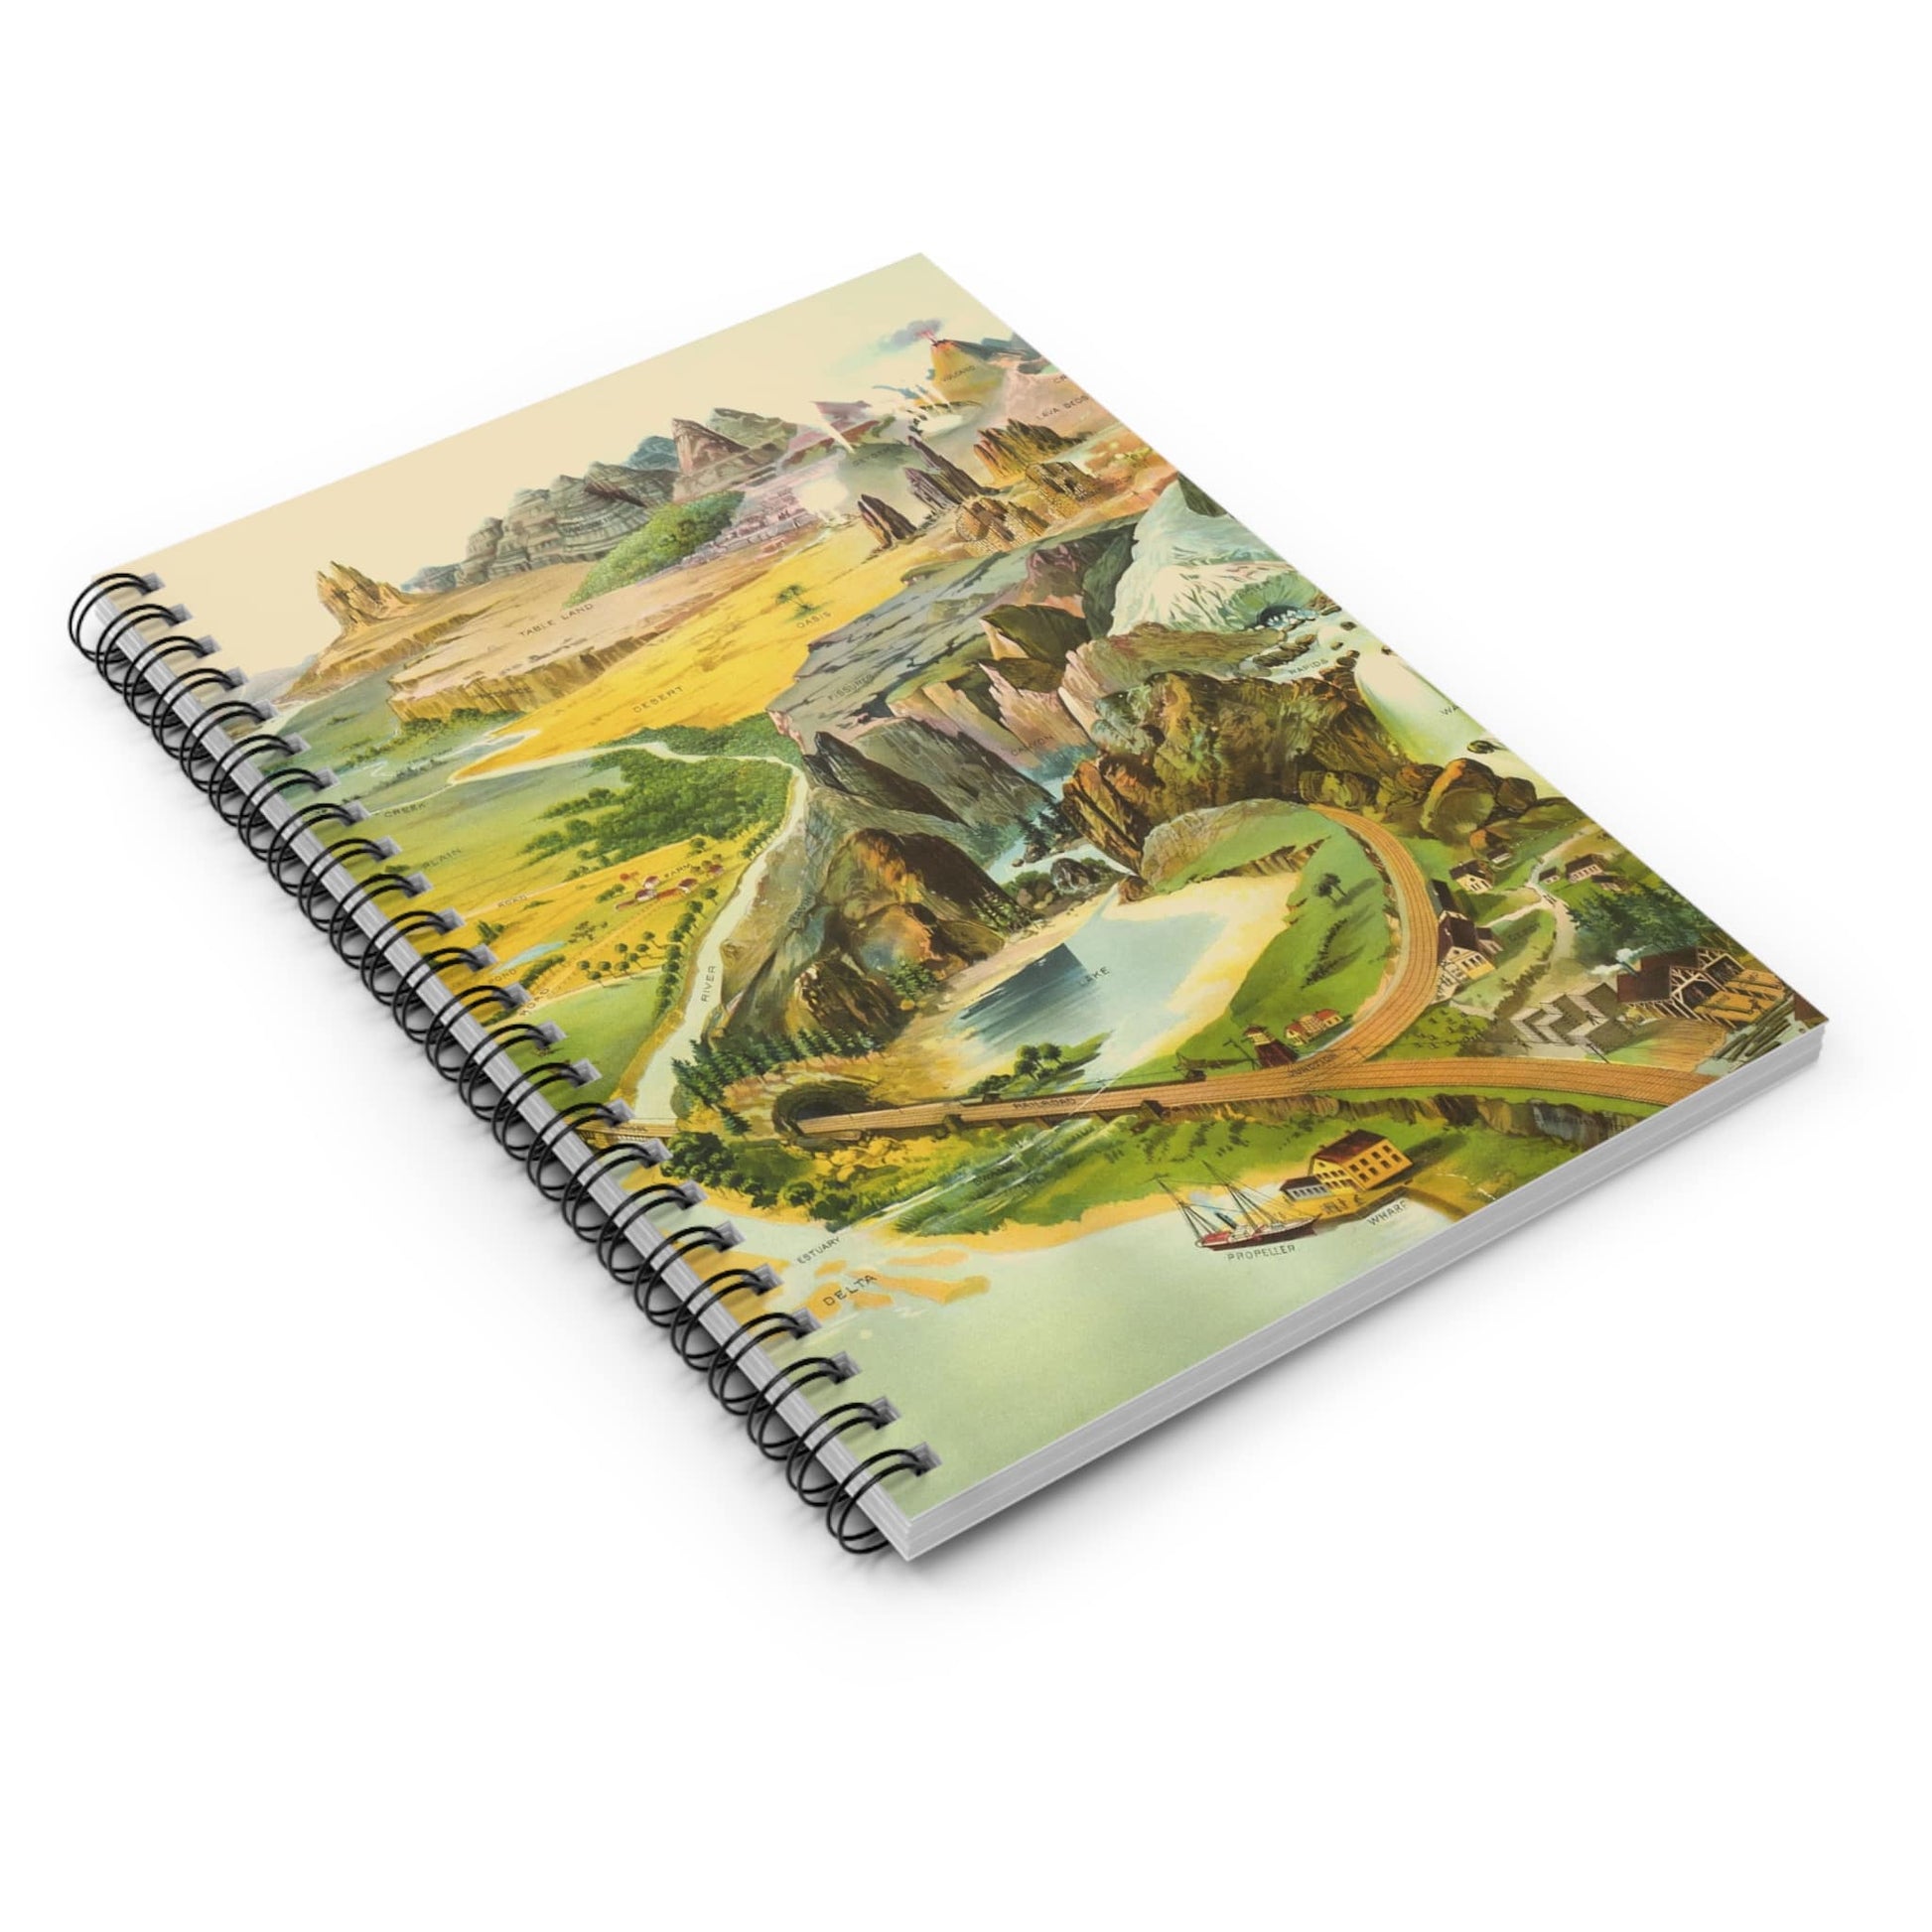 Cool Landscape Spiral Notebook Laying Flat on White Surface